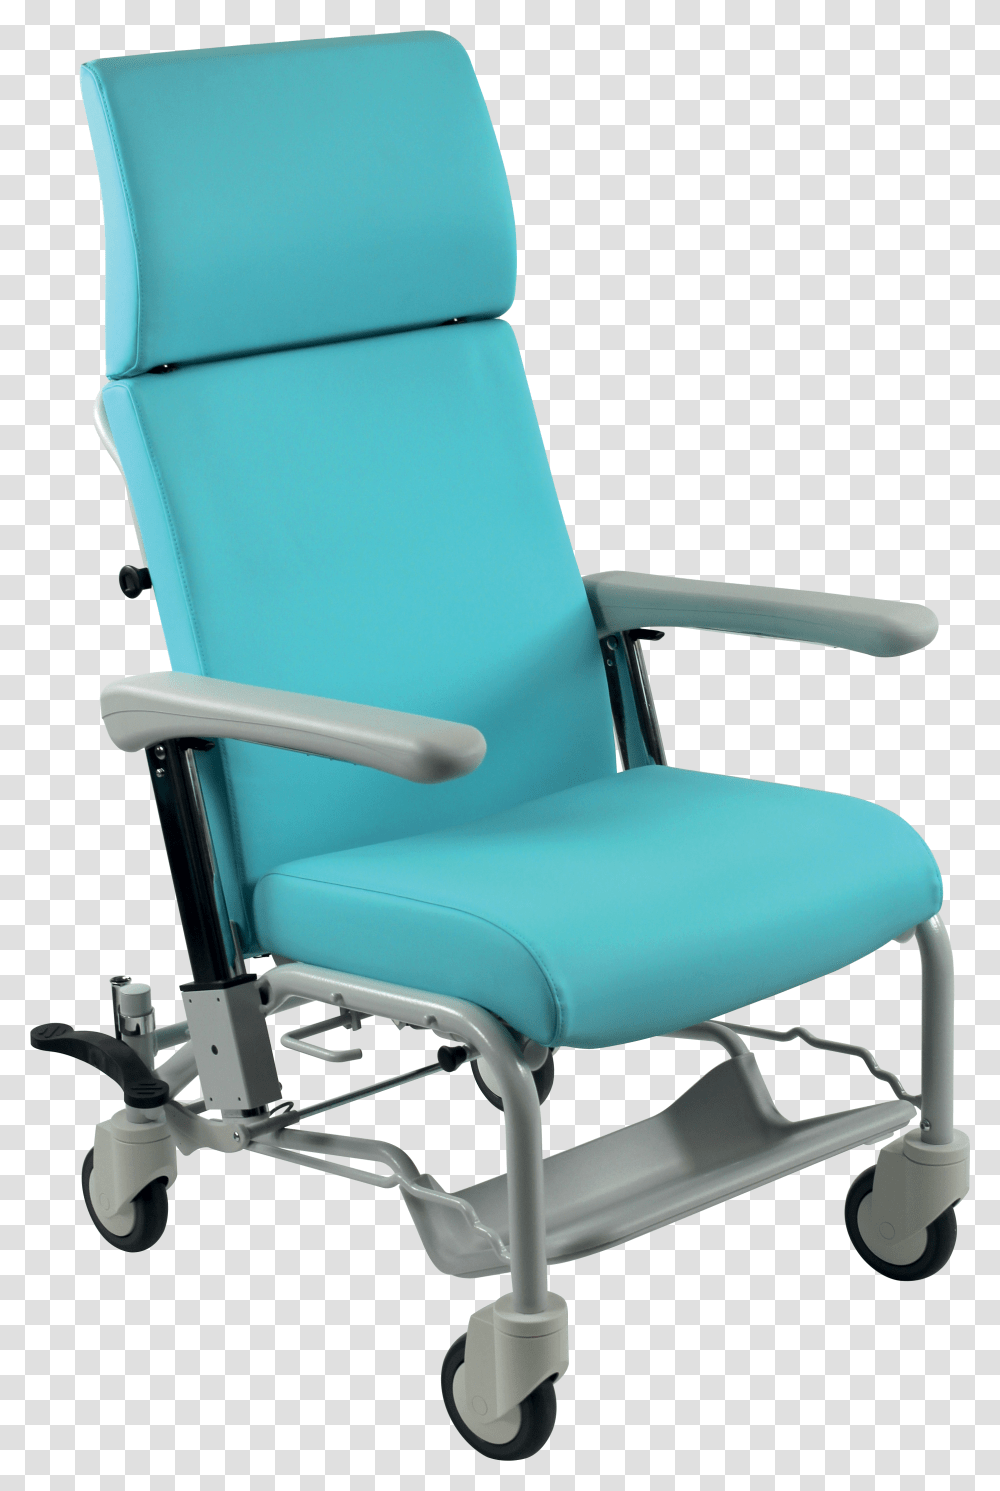 Medical Chair Transparent Png